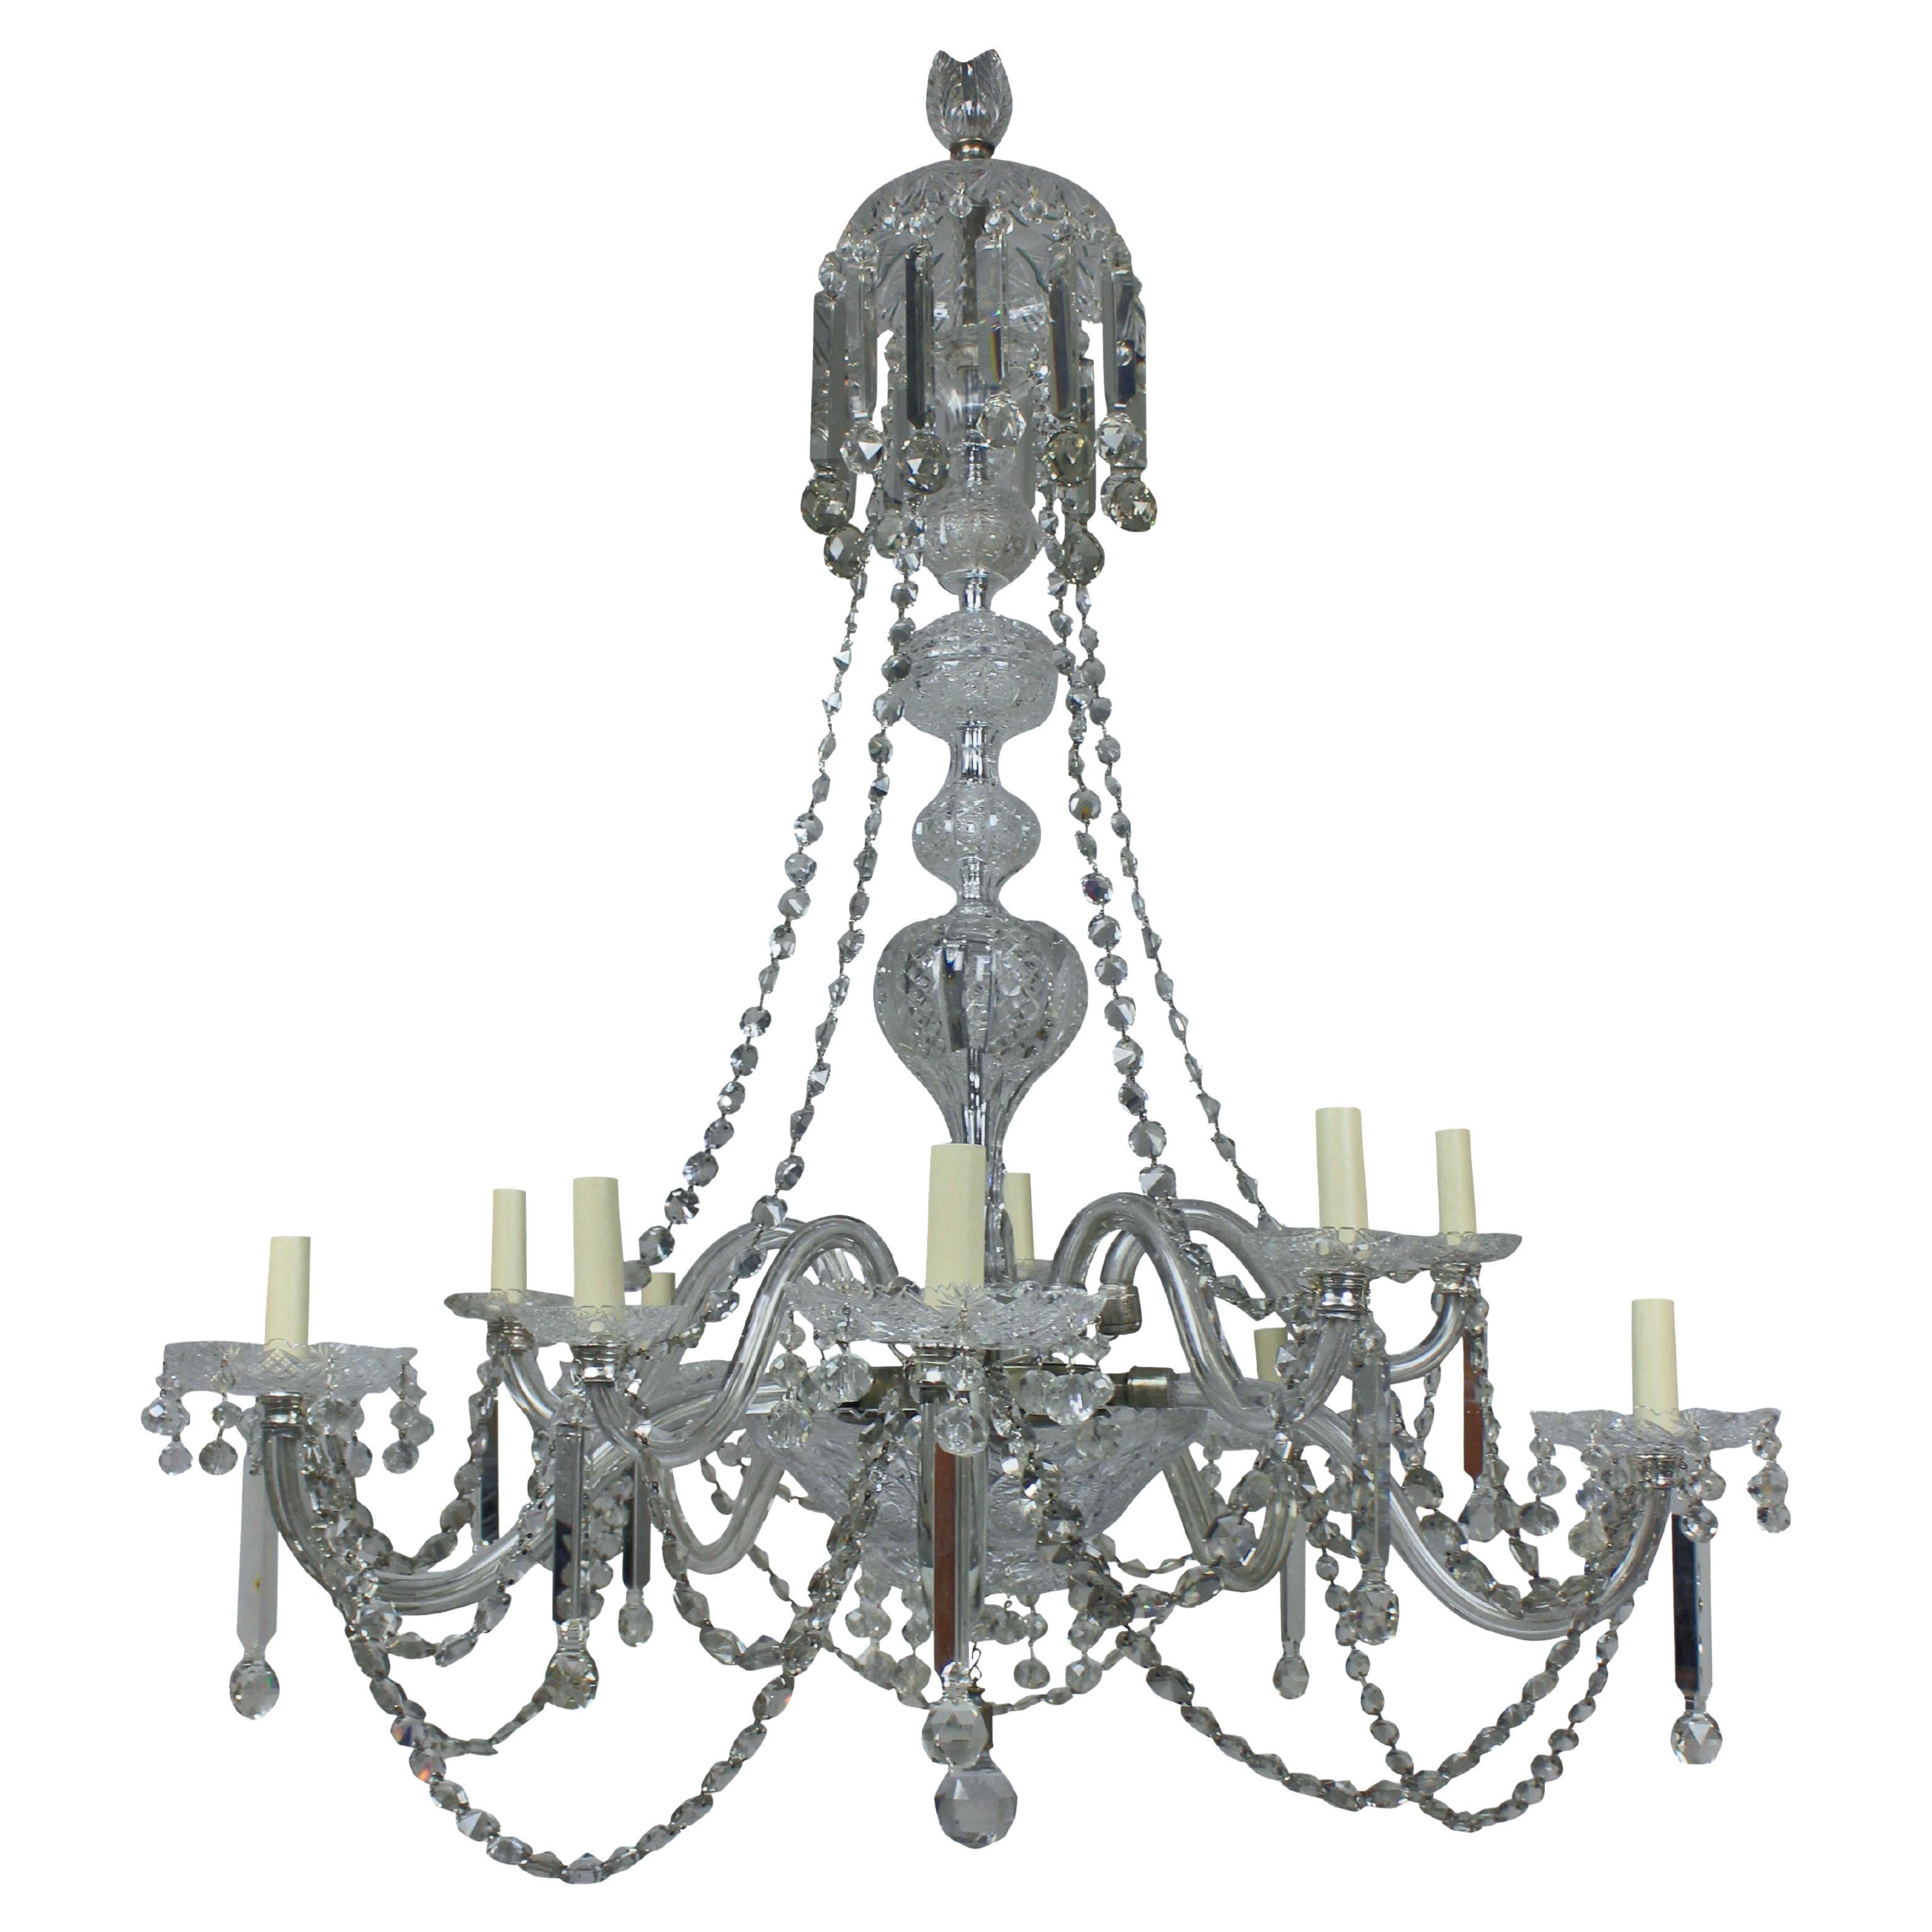 Large English Ten Light 19th Century Cut Glass Chandelier For Sale